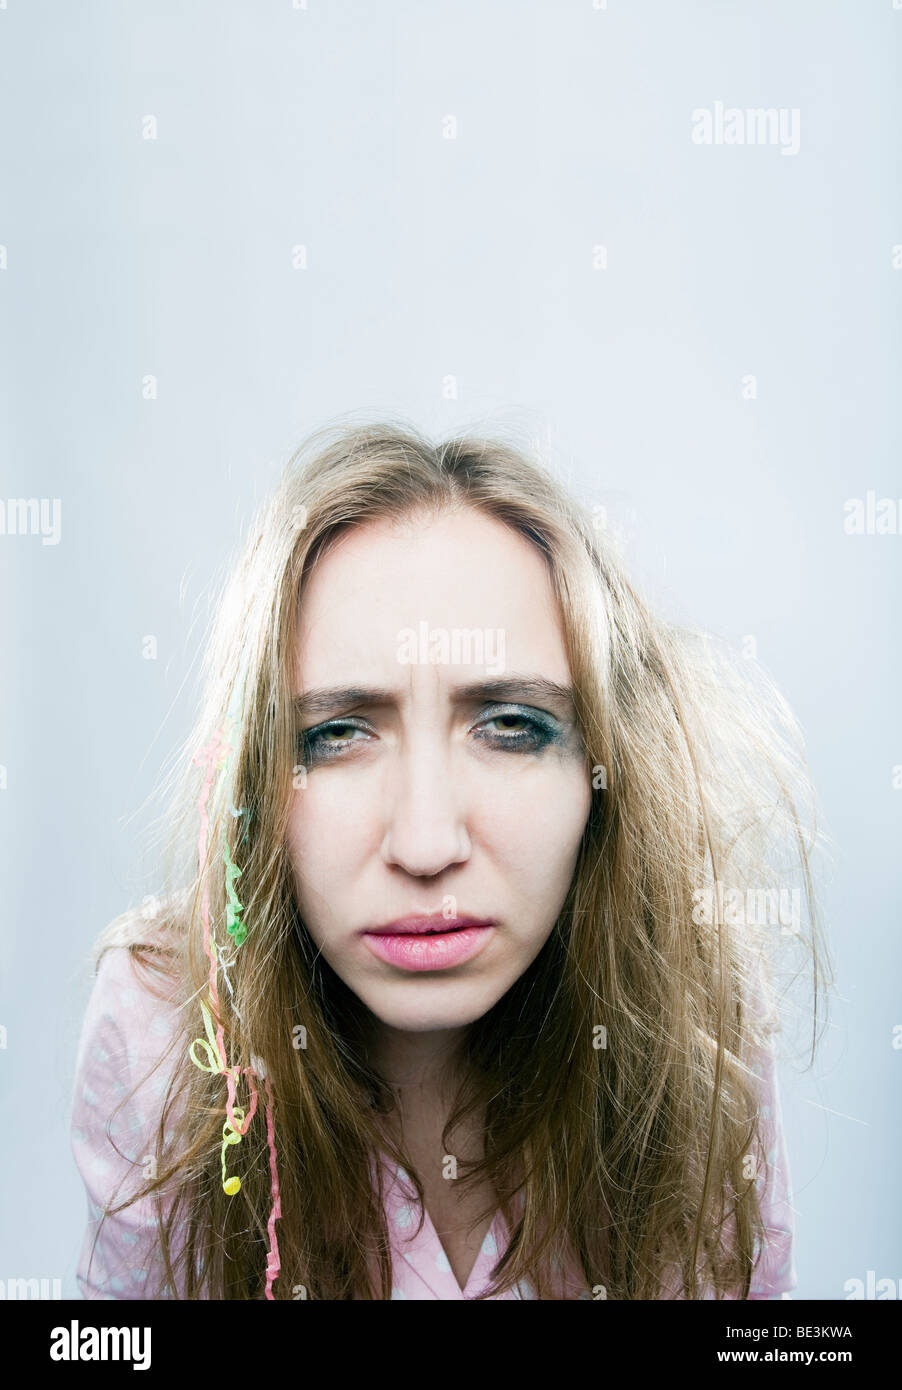 Young woman with a hangover Stock Photo